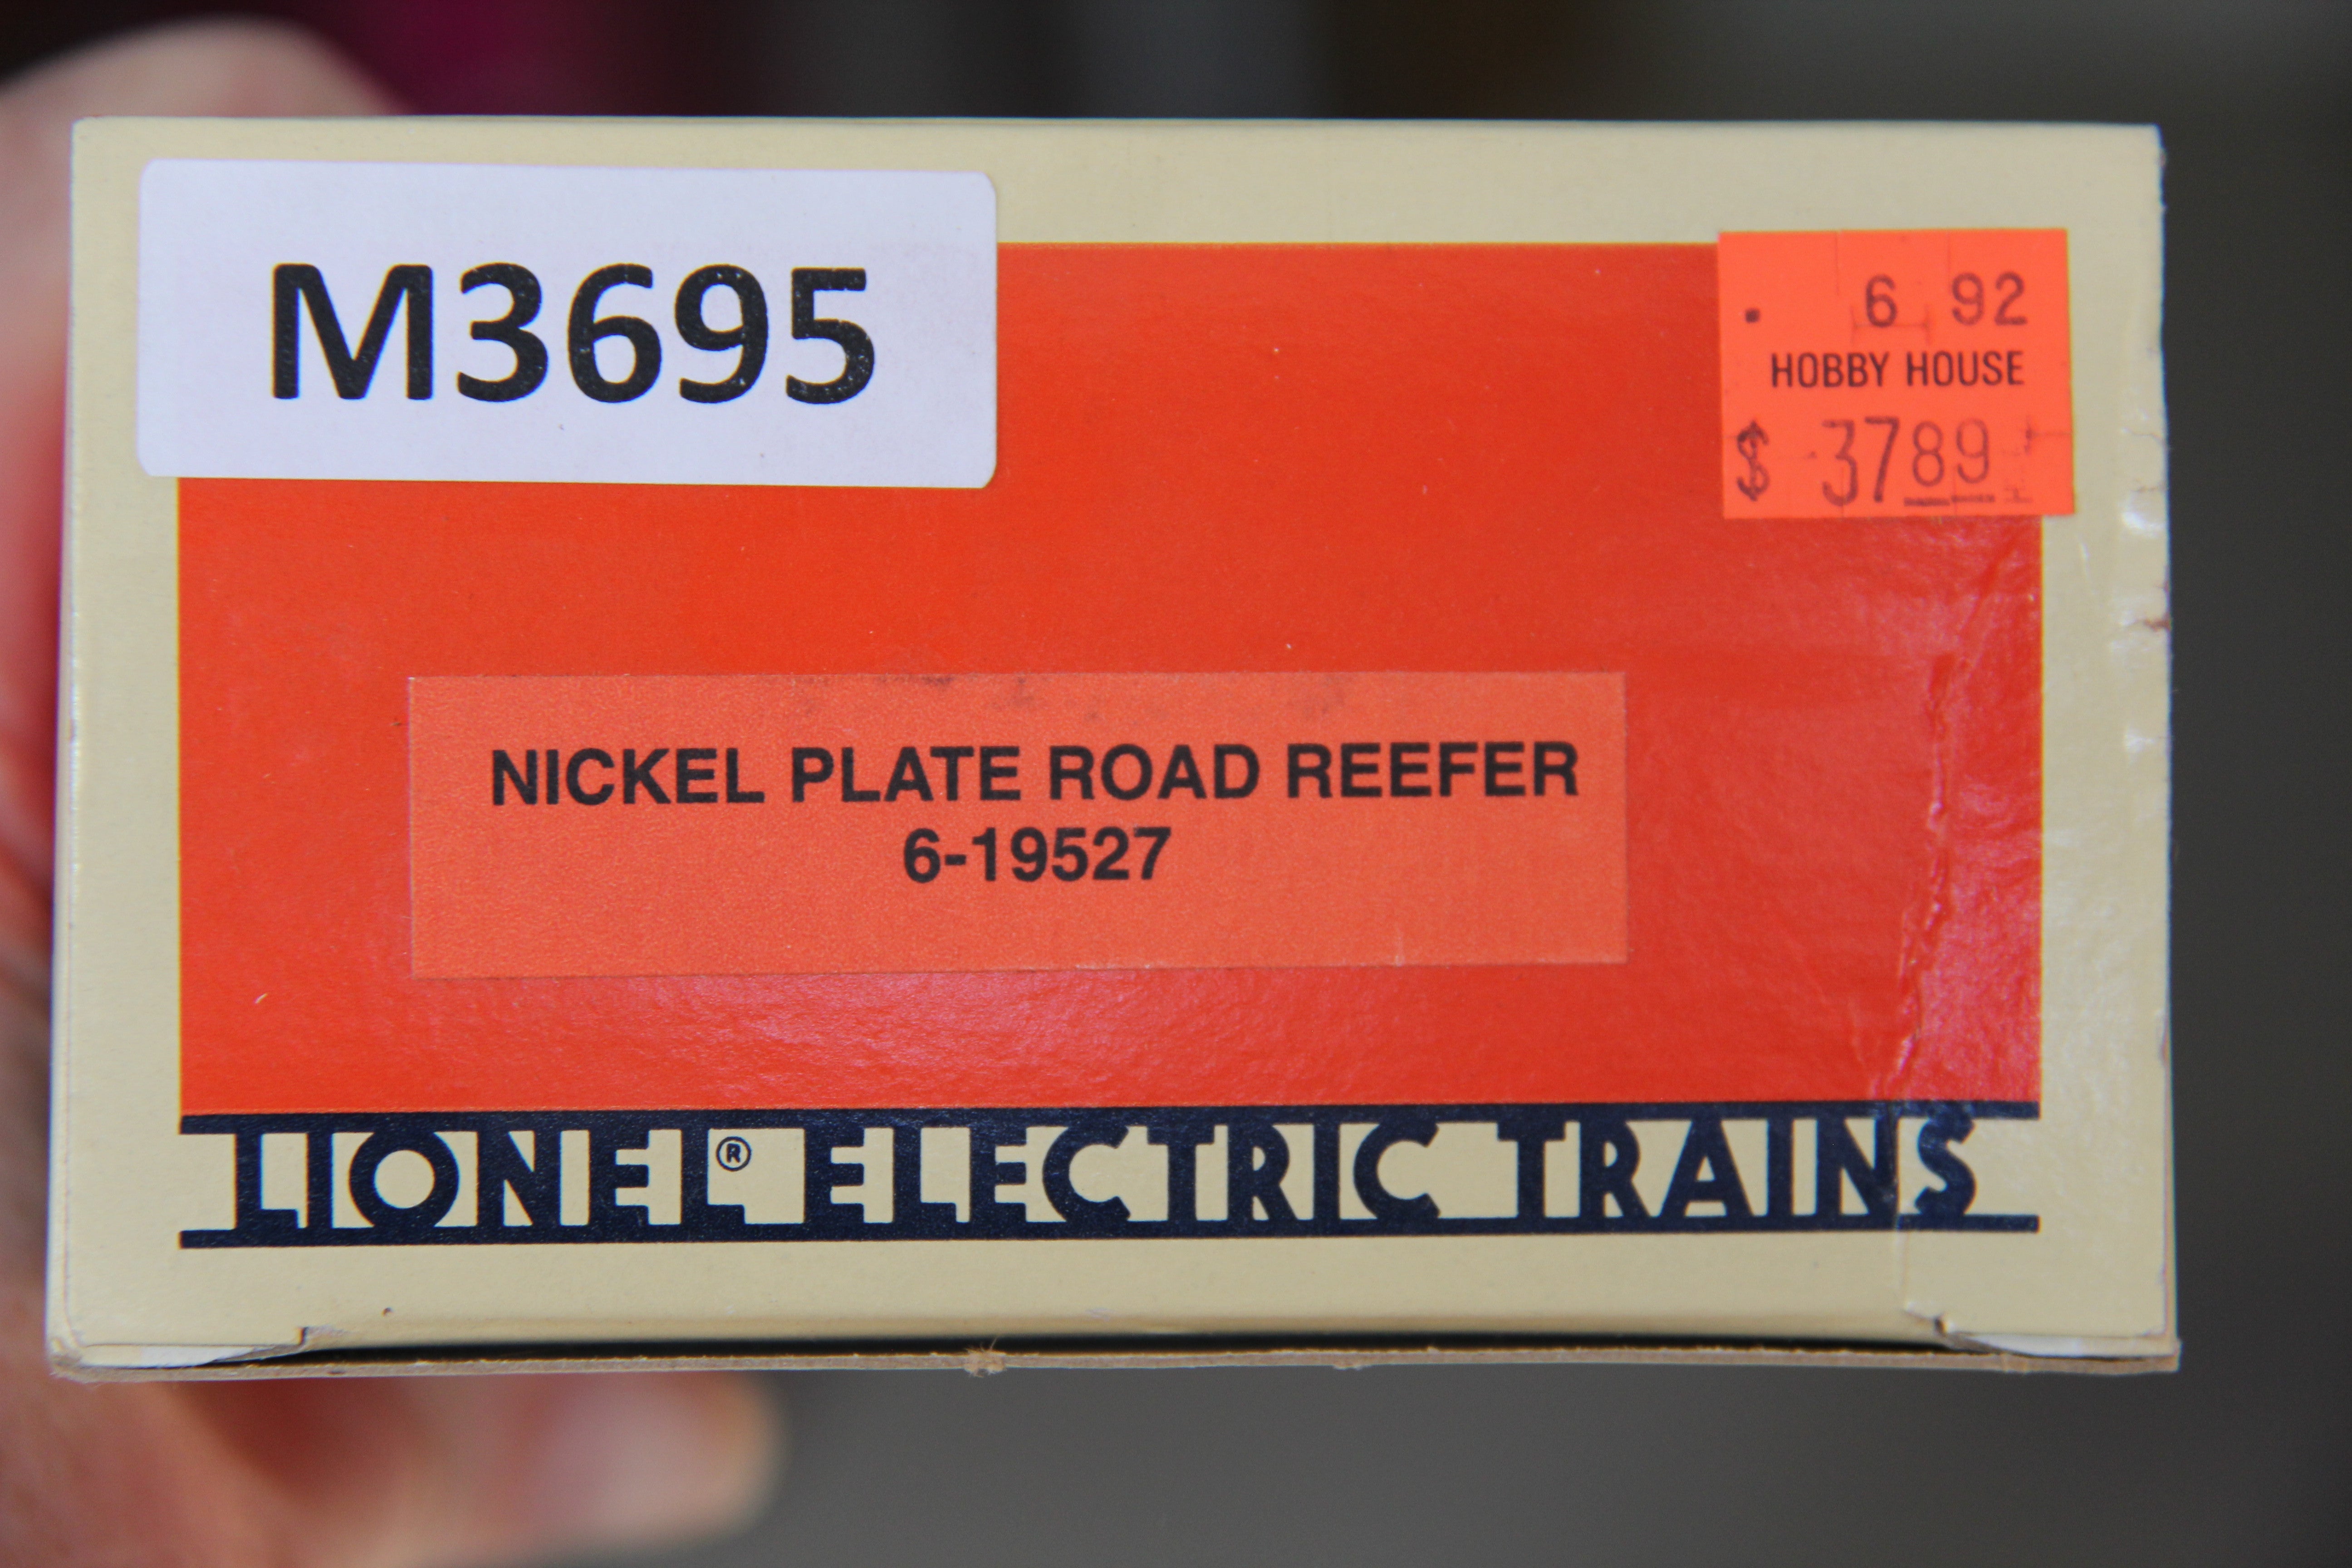 Lionel 6-19527 Nickel Plate Road Reefer-Second hand-M3695